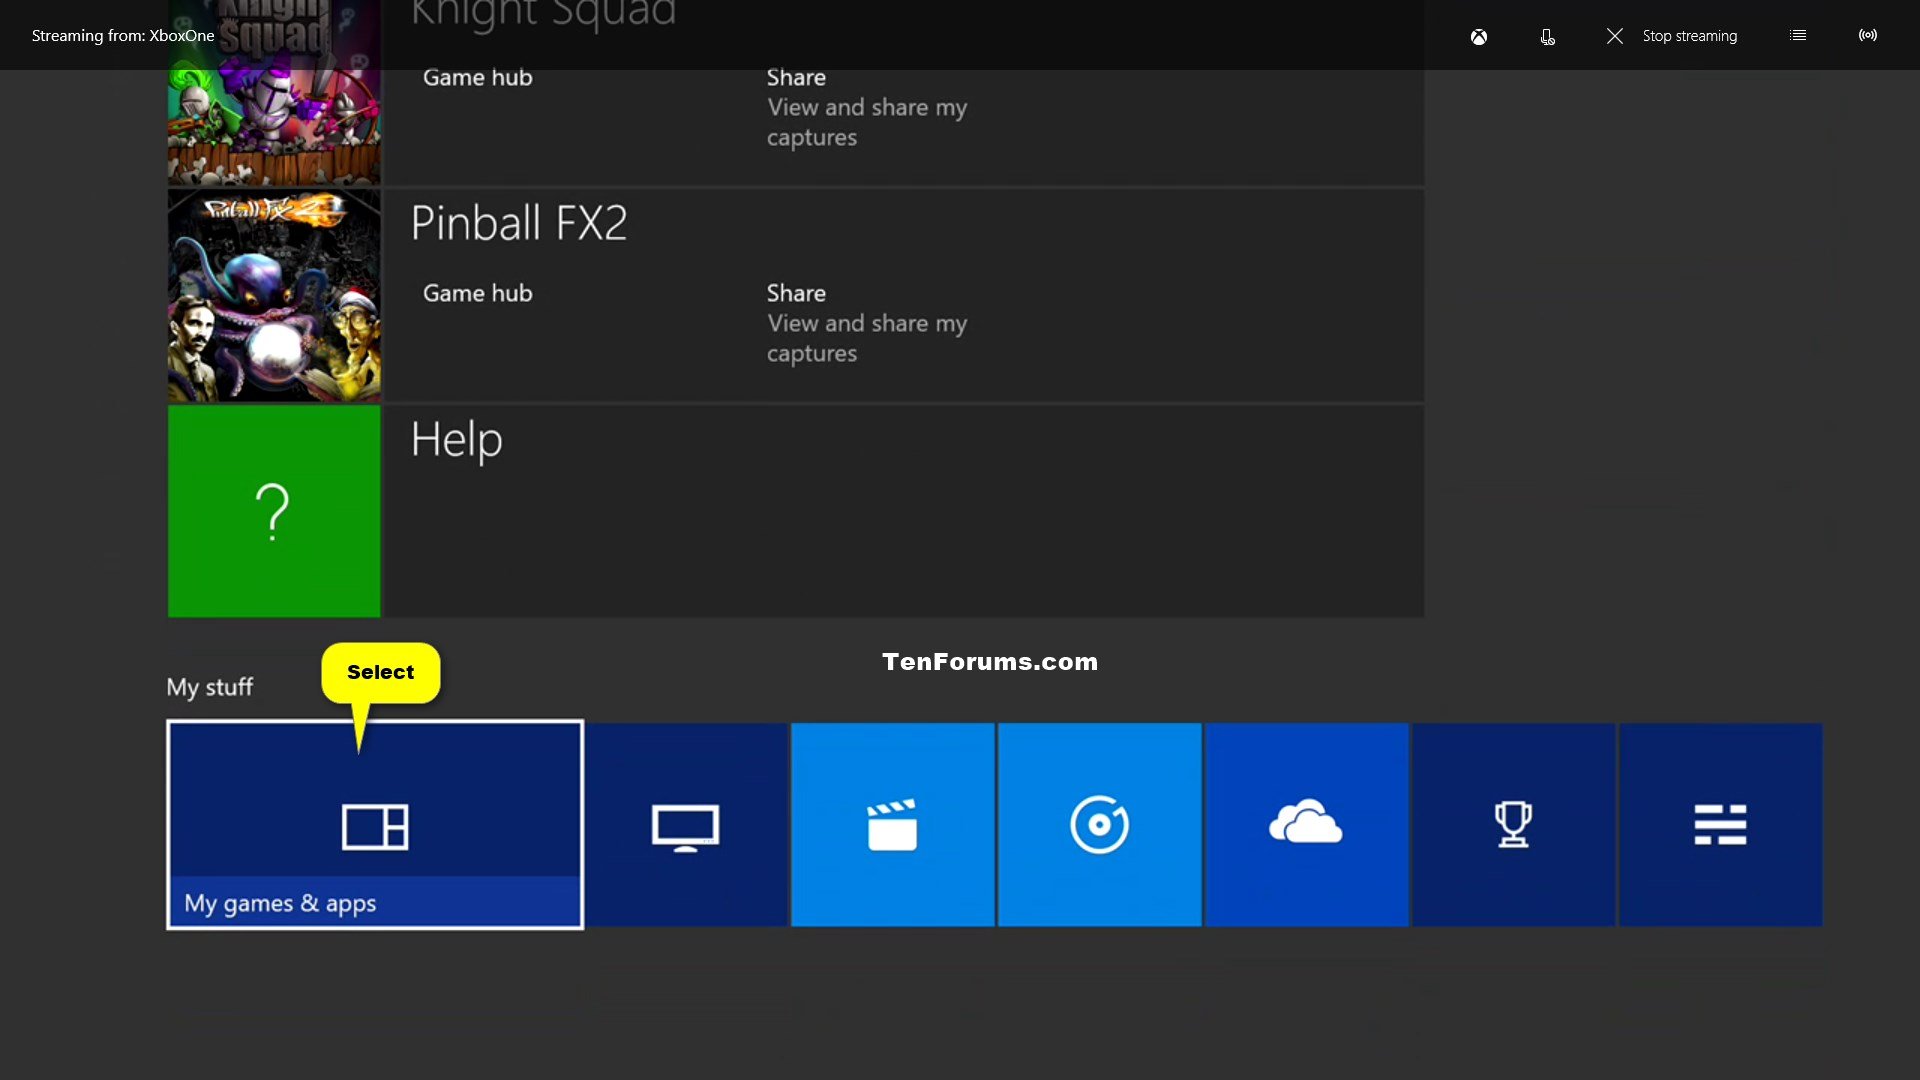 Uninstall Xbox One Games And Apps Tutorials - delete roblox in my games from the app store